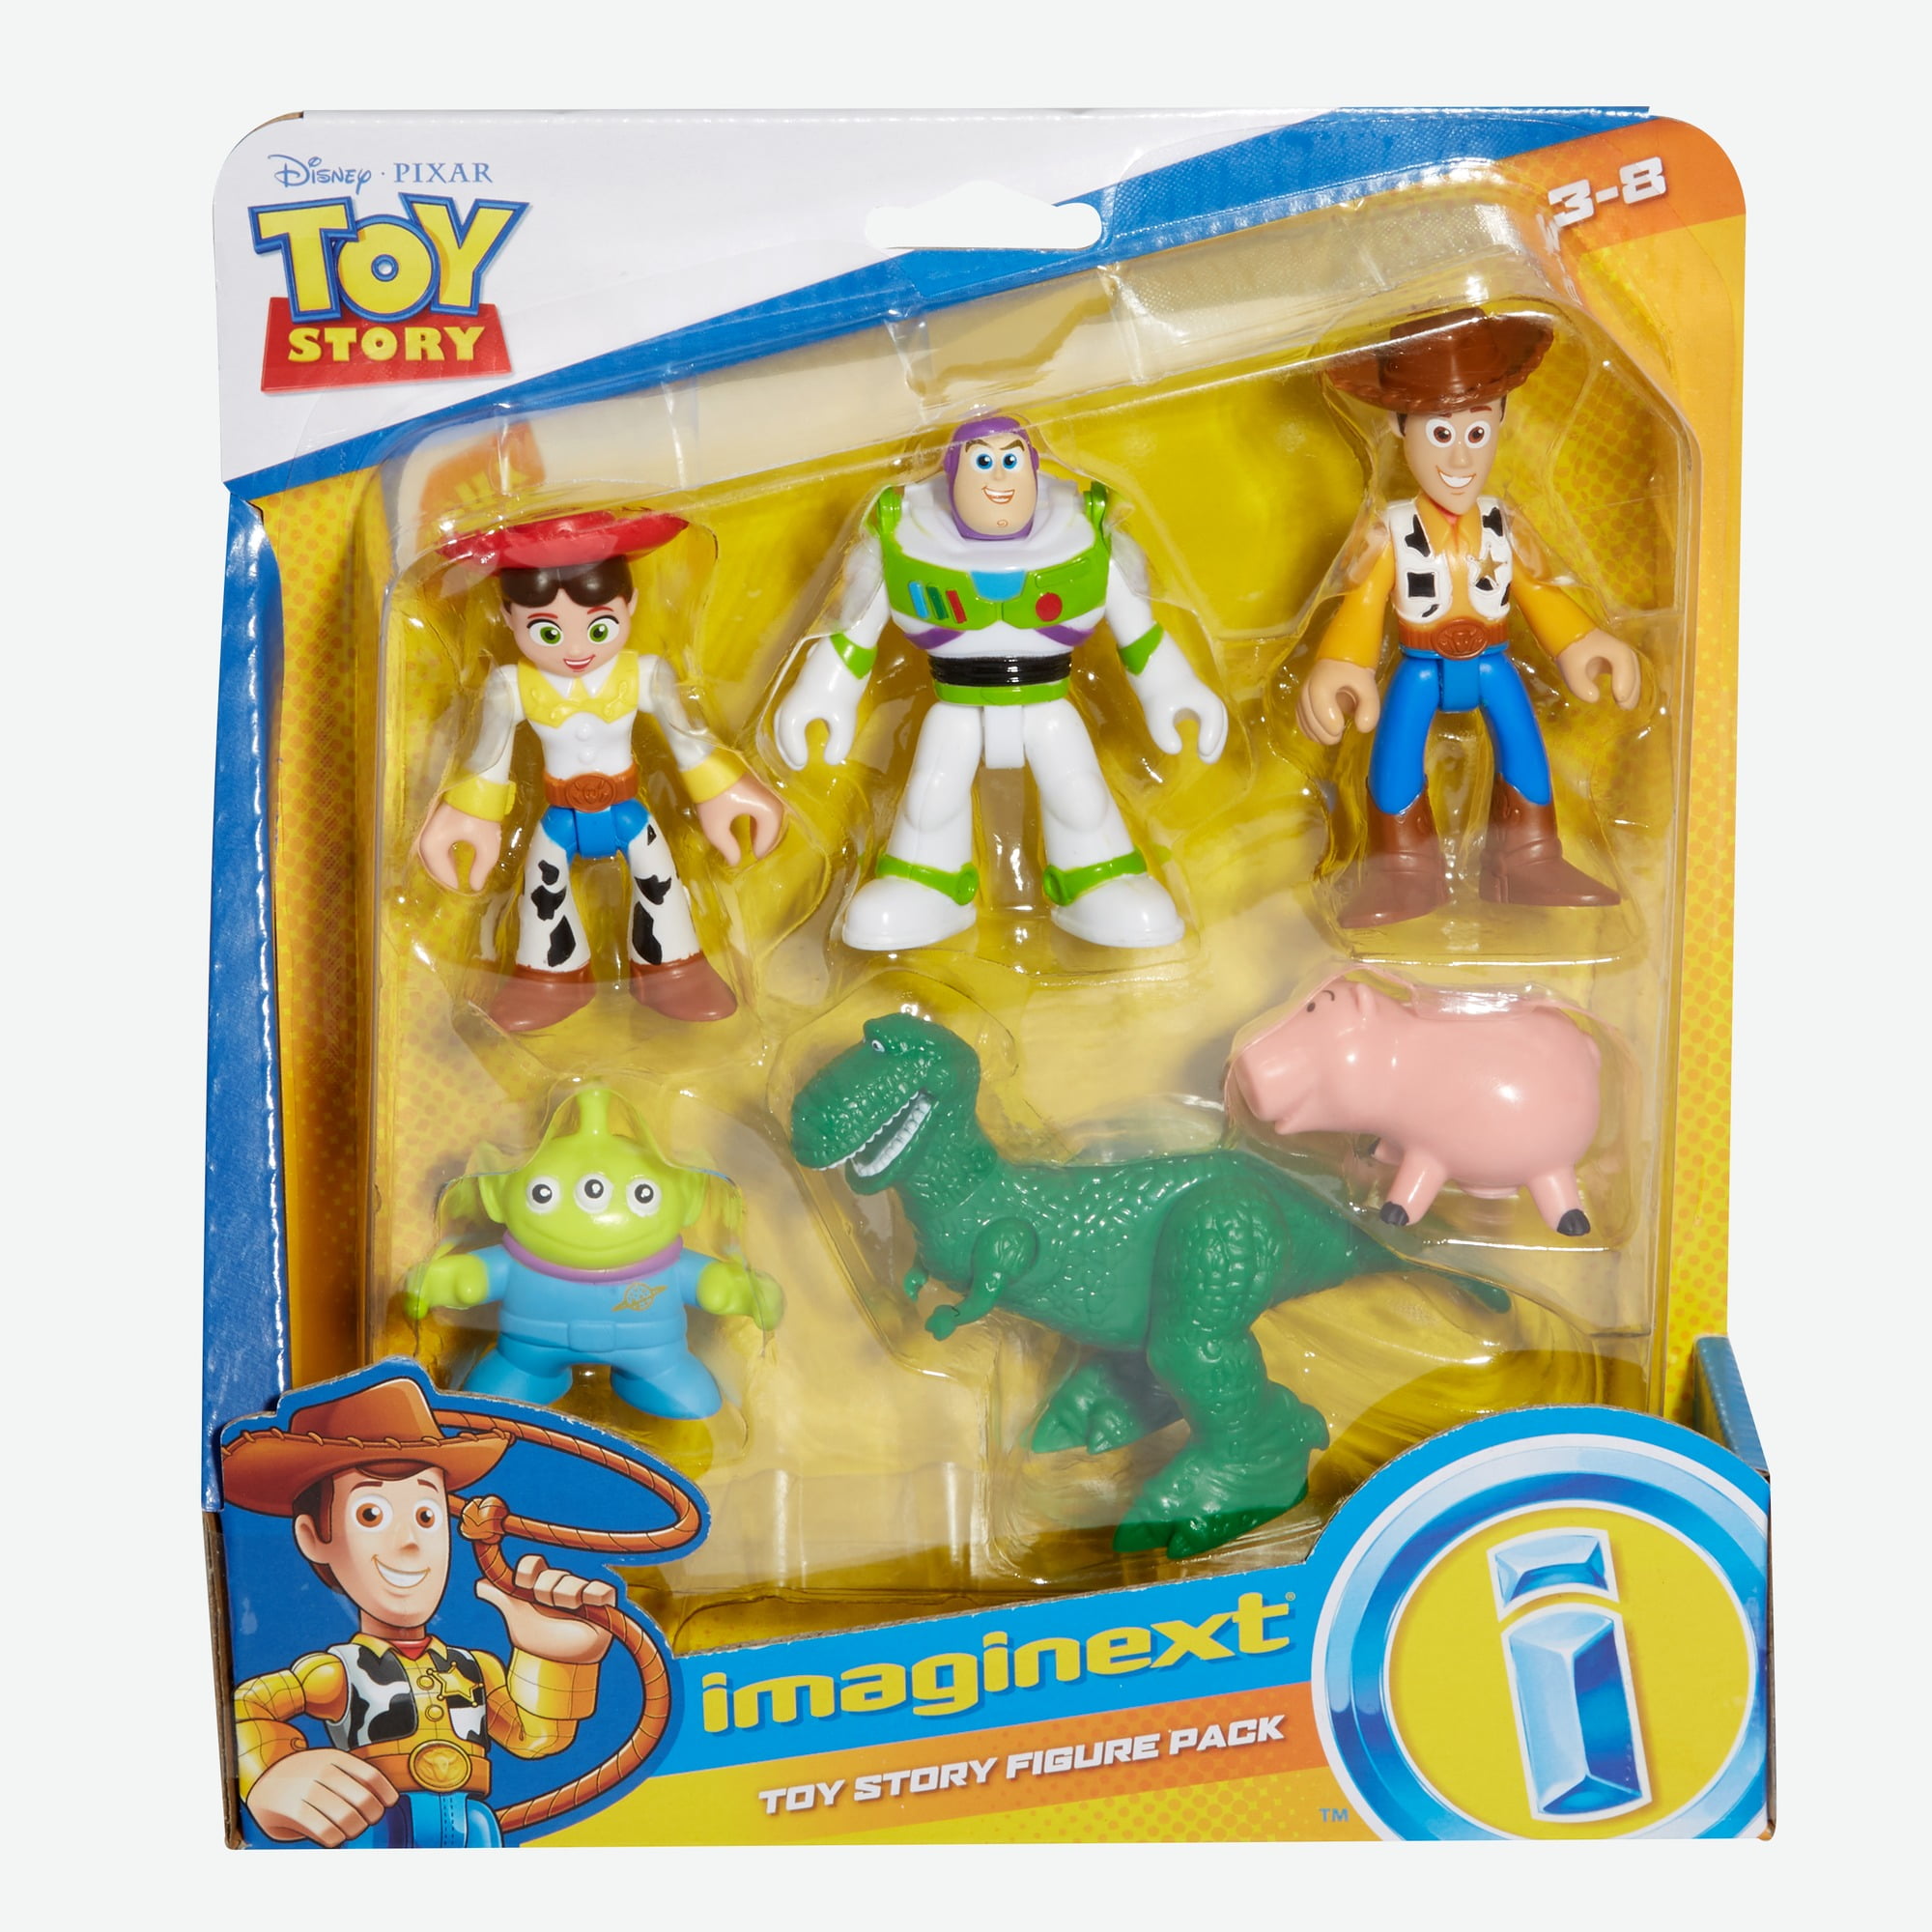 Imaginext Figures Featuring Disney Pixar Toy Story 4 Bunny & Buzz Lightyear for sale online 